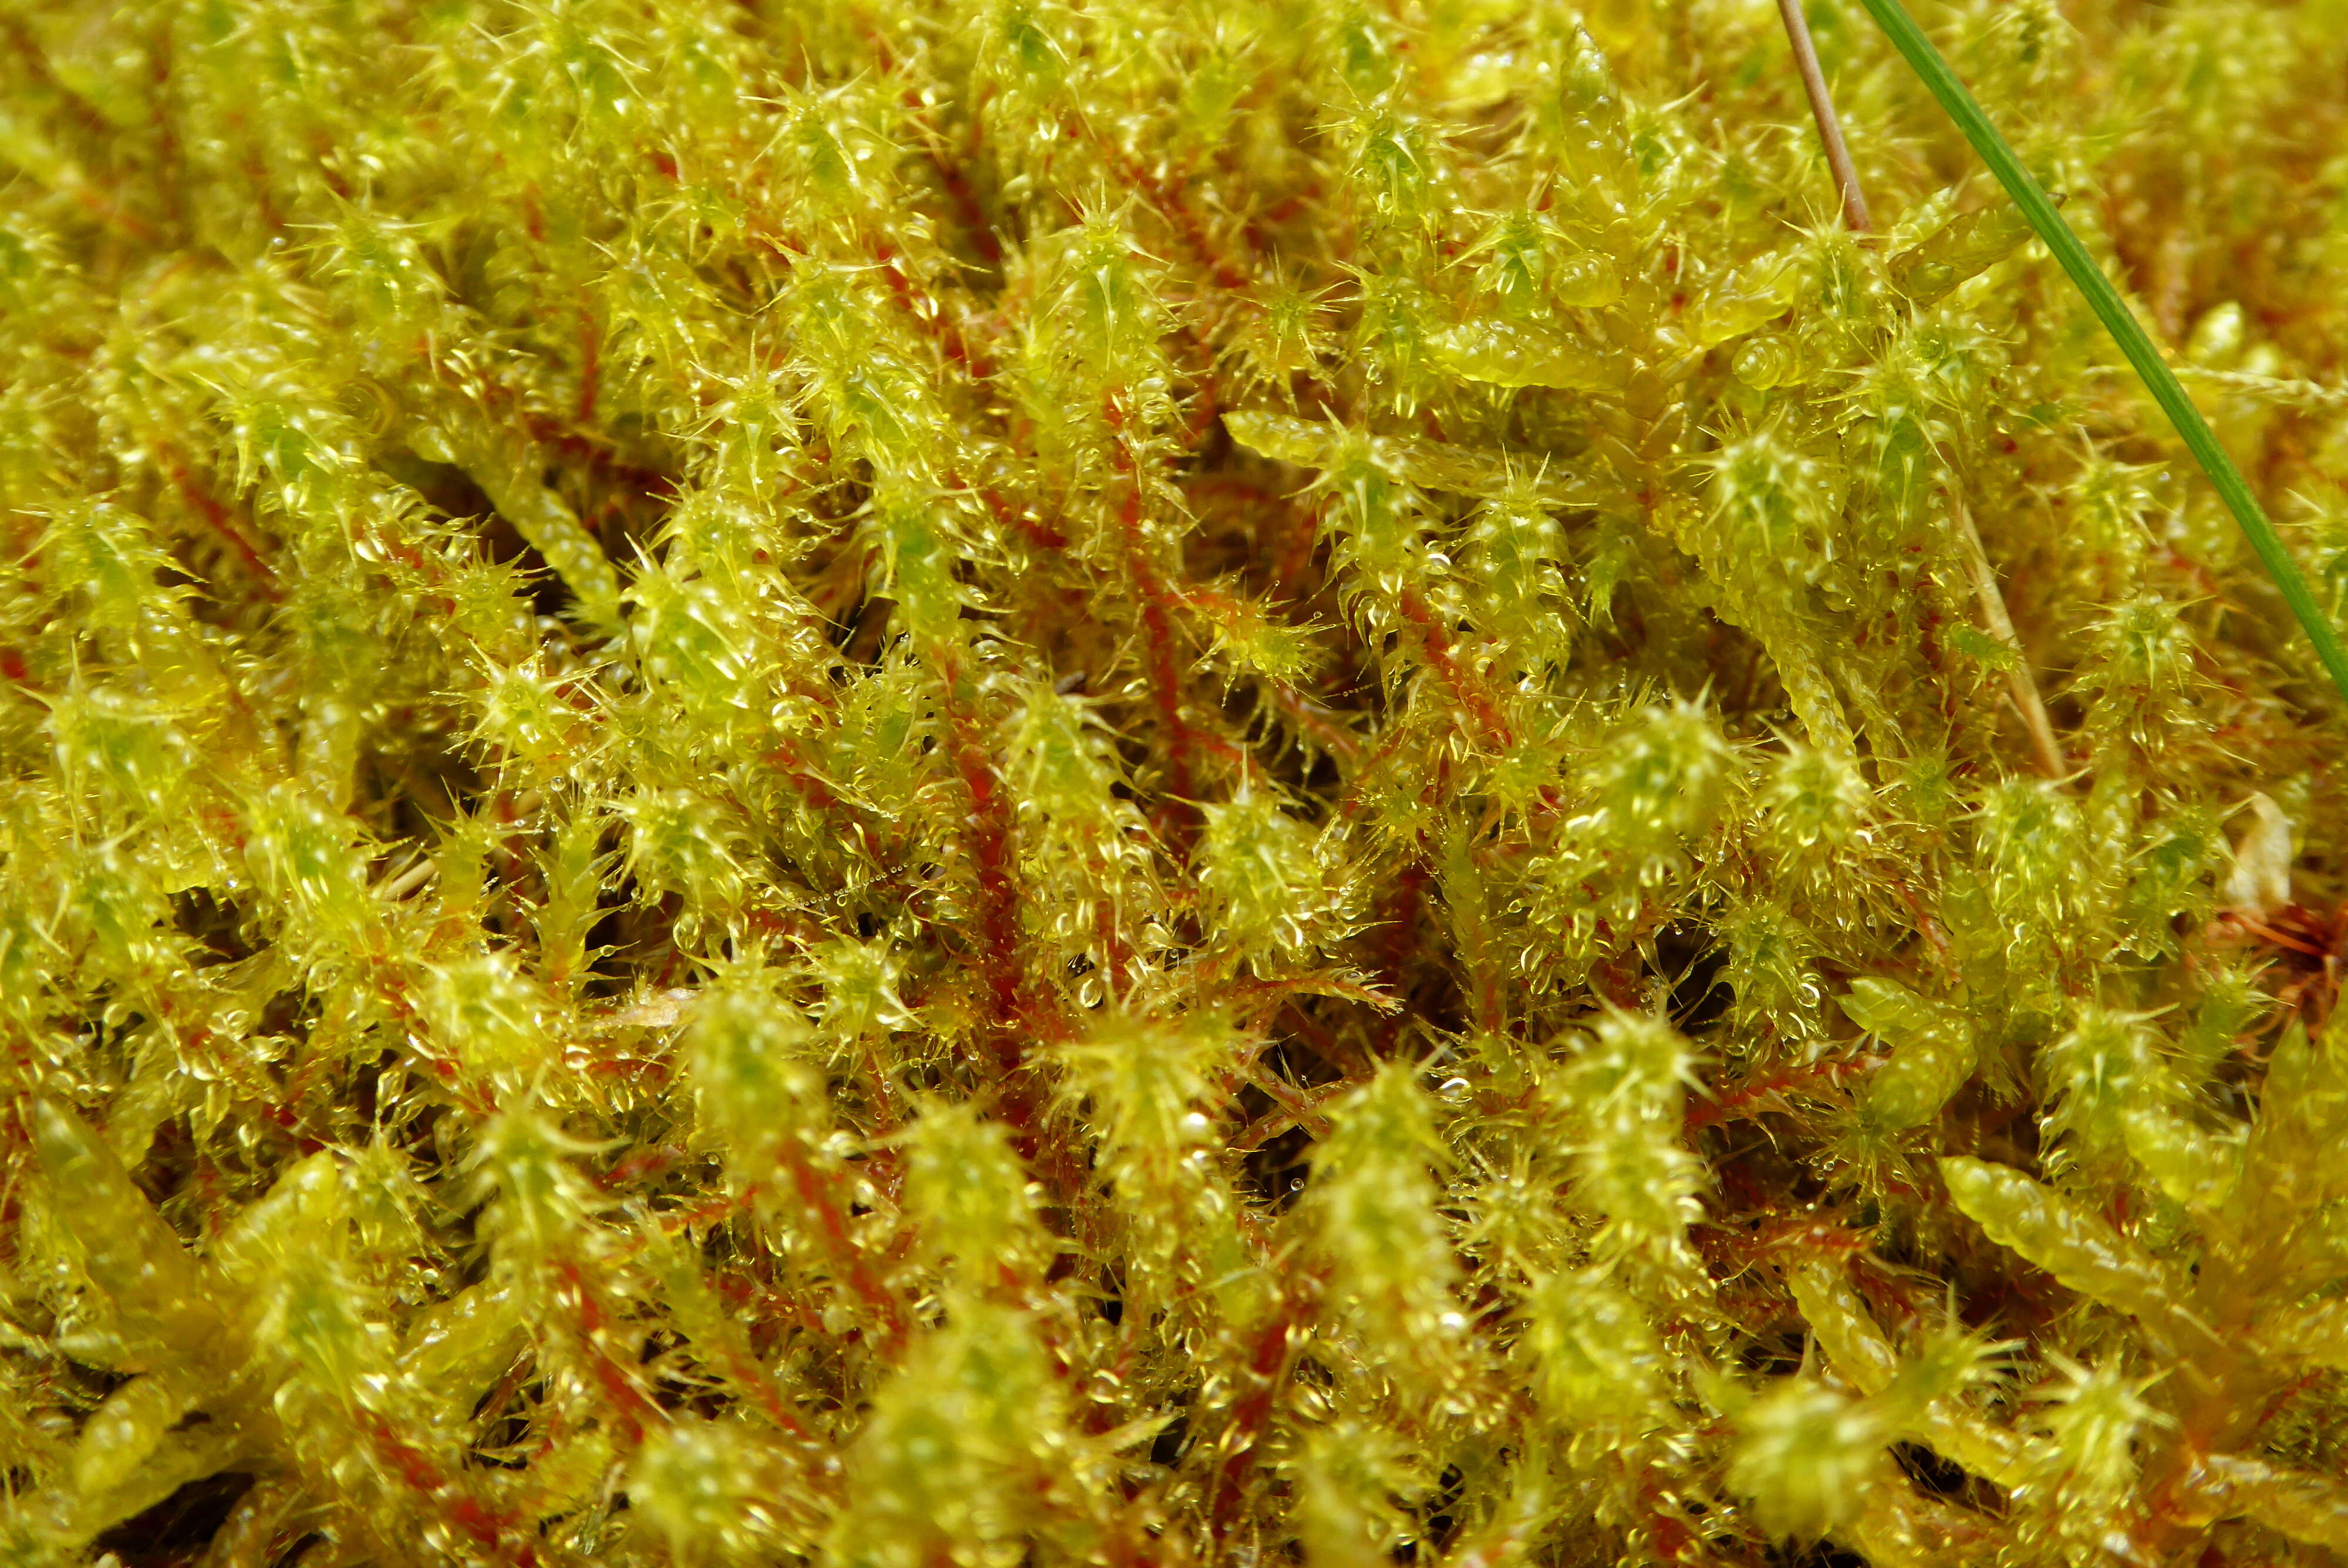 Image of square goose neck moss